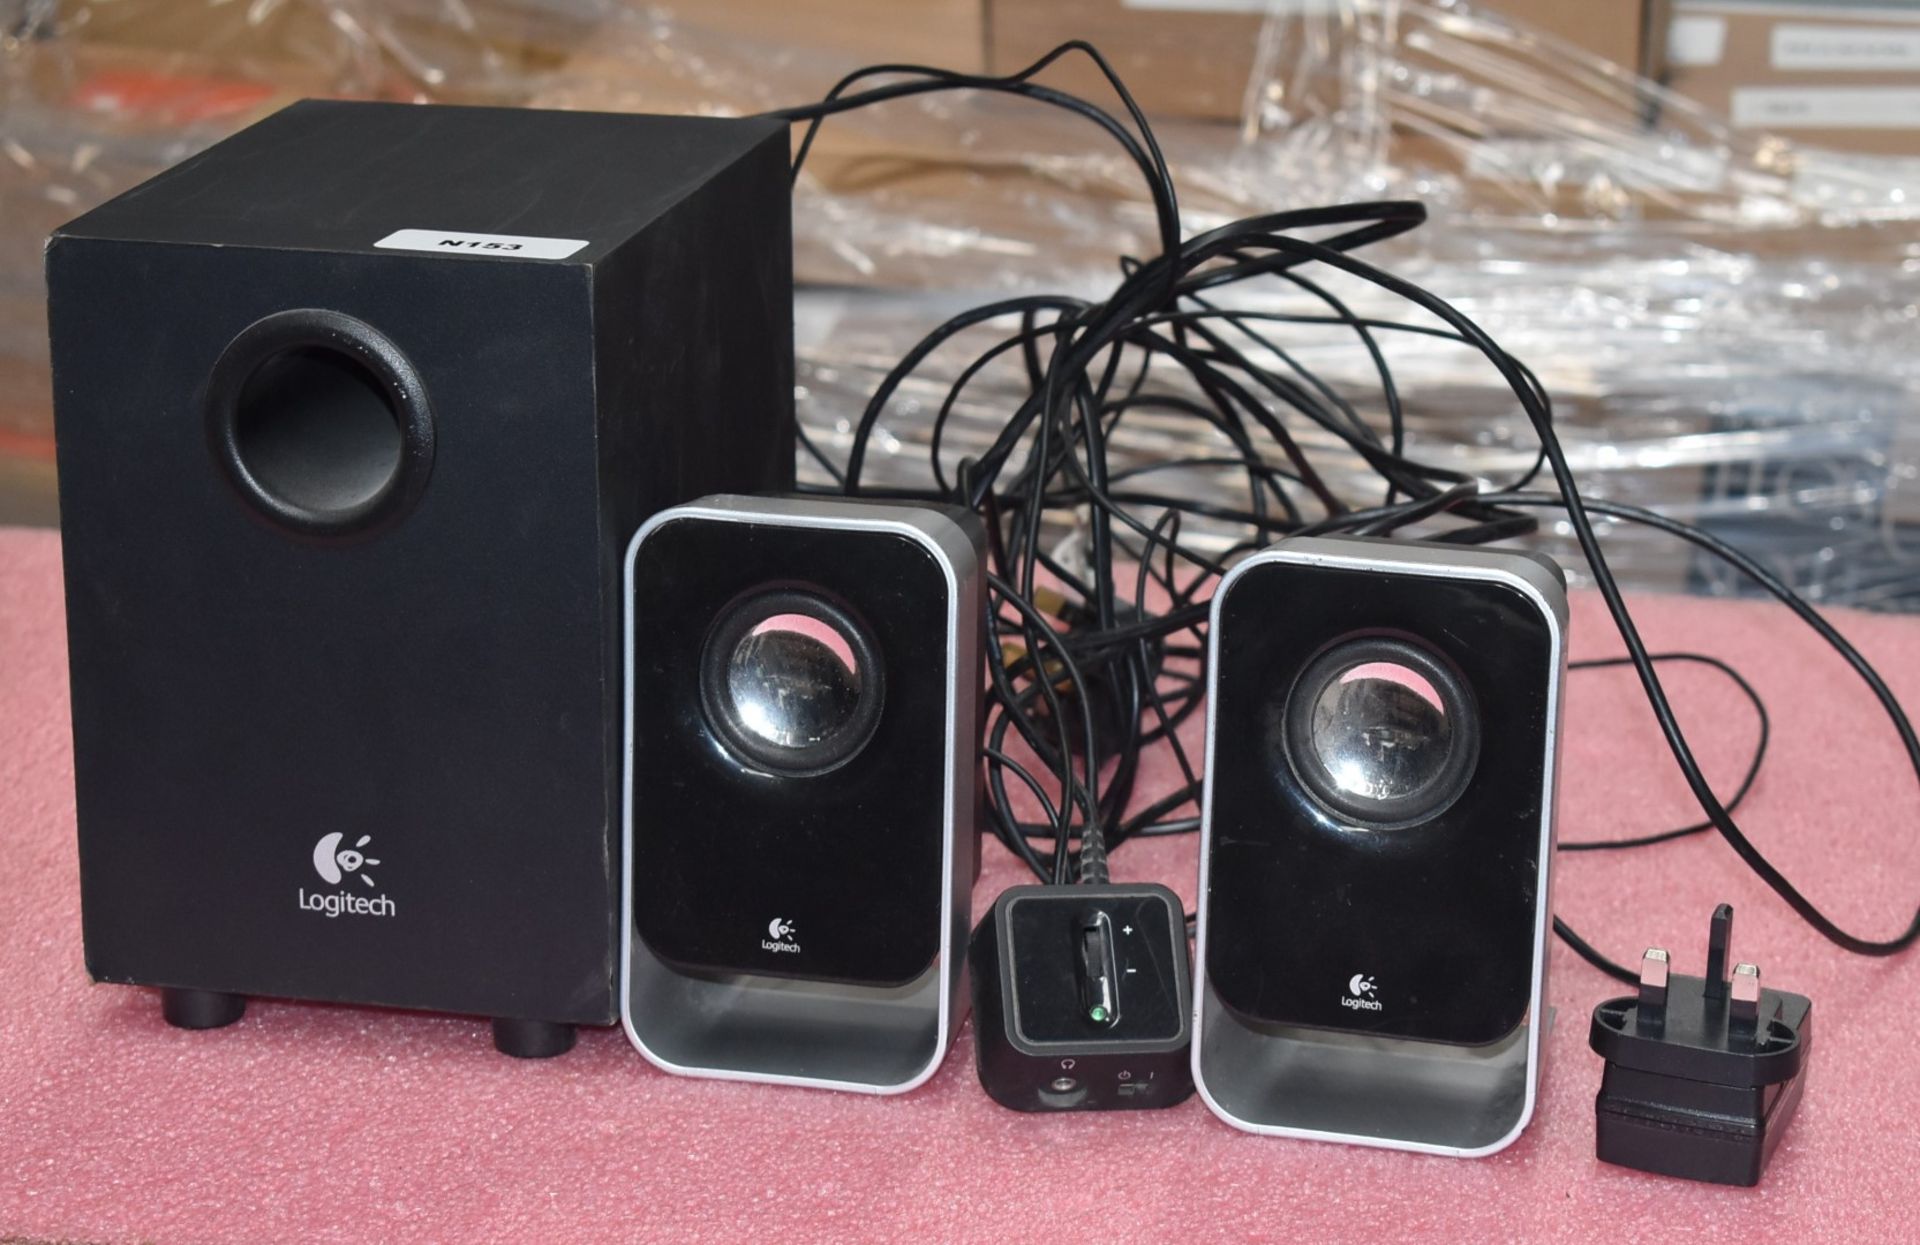 1 x Logitech Computer Speaker System - Includes Two Speakers and Subwoofer - Image 2 of 3